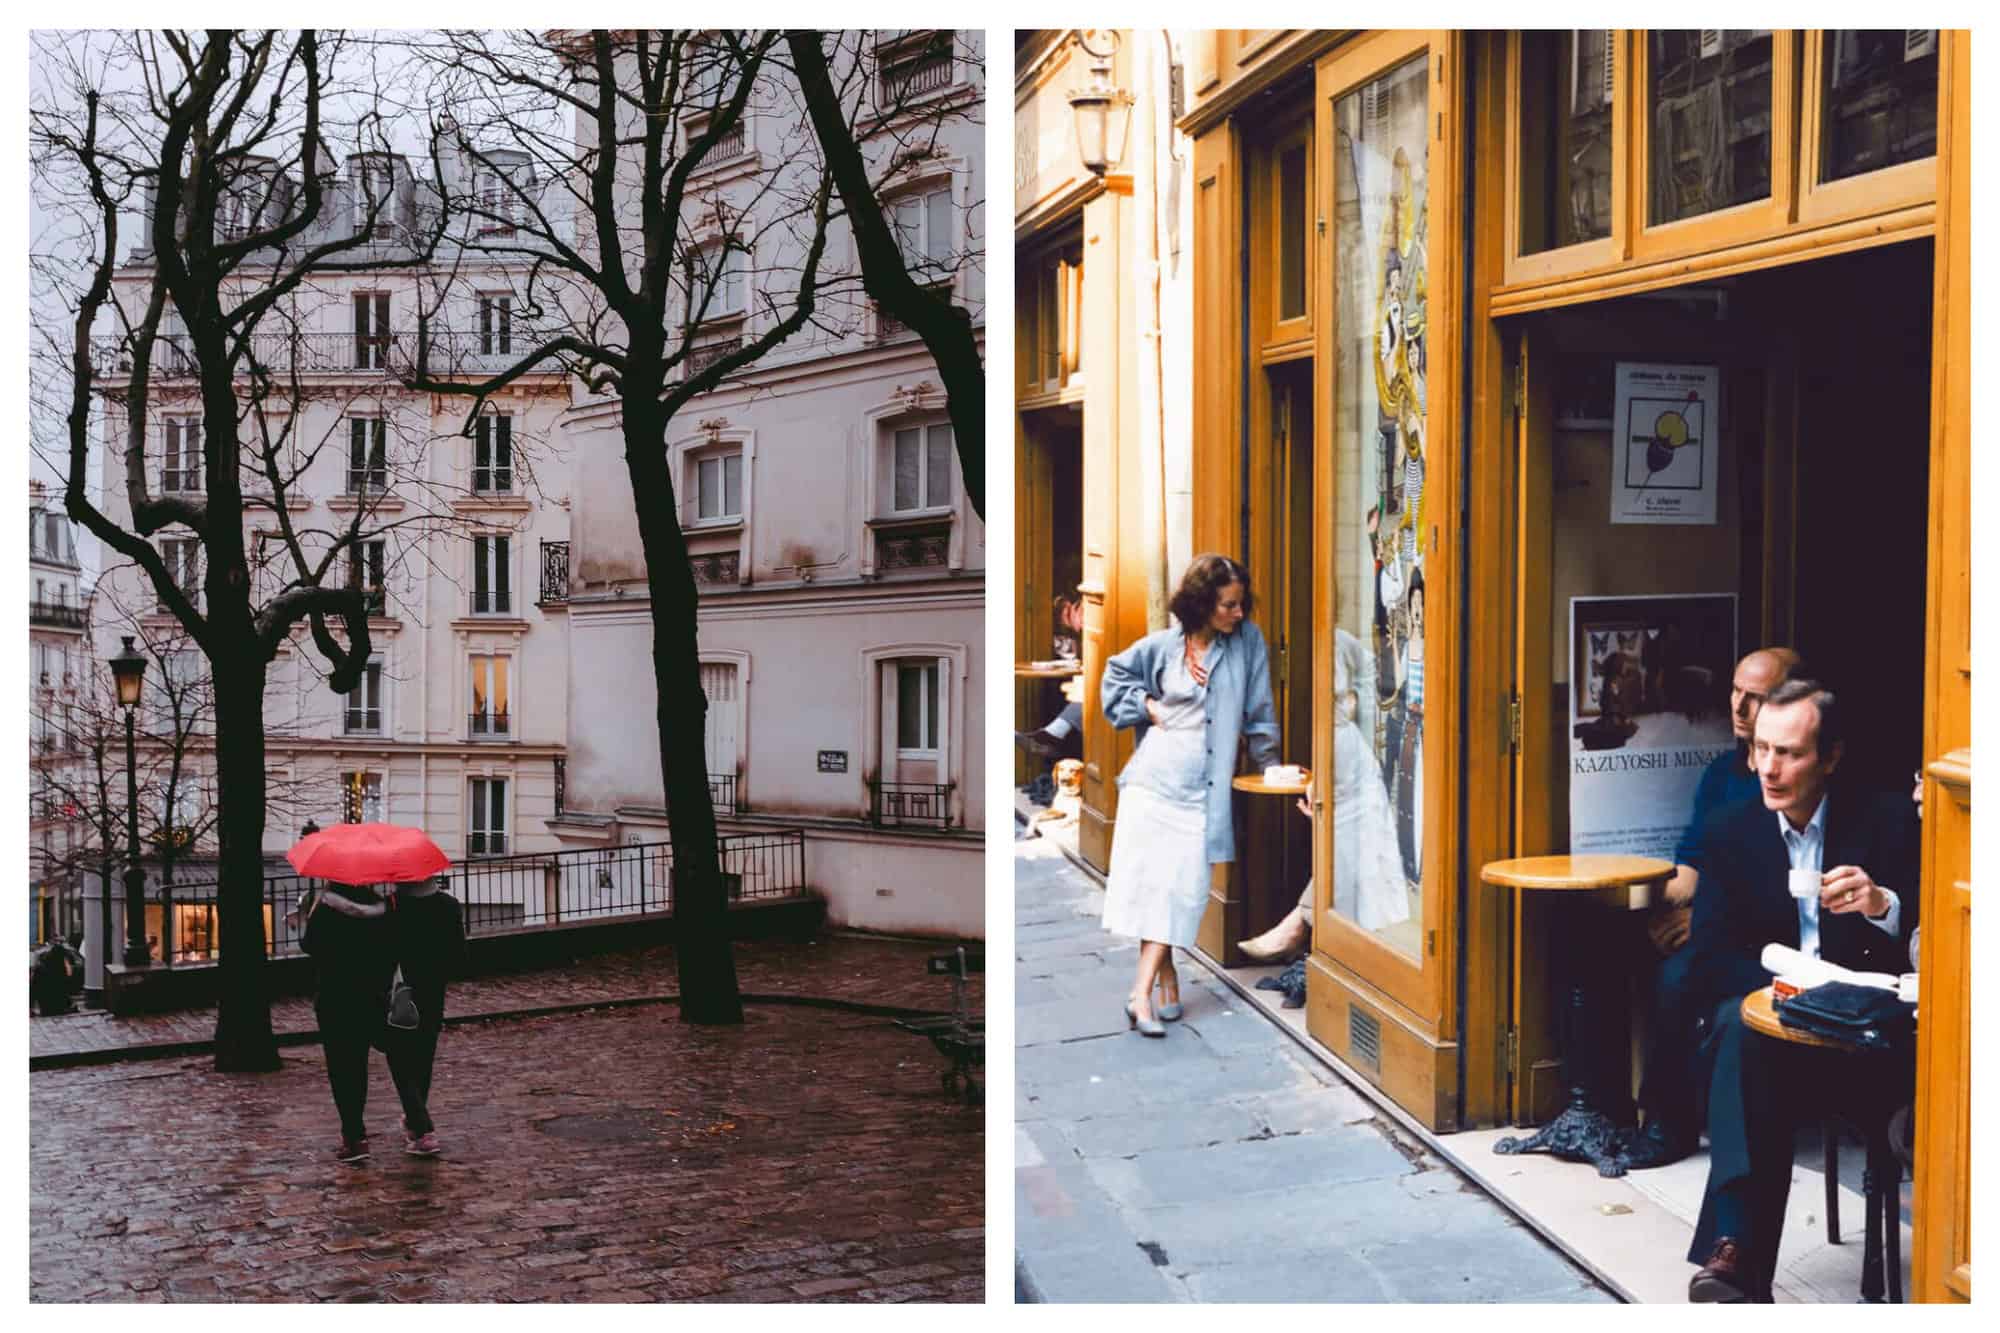 Left: 2 people are seen sharing a red umbrella in Montmartre. Right: A Parisian bar is pictured along with its customers including a lady standing talking to another person, a seated man looking at the street, and another man drinking his espresso.